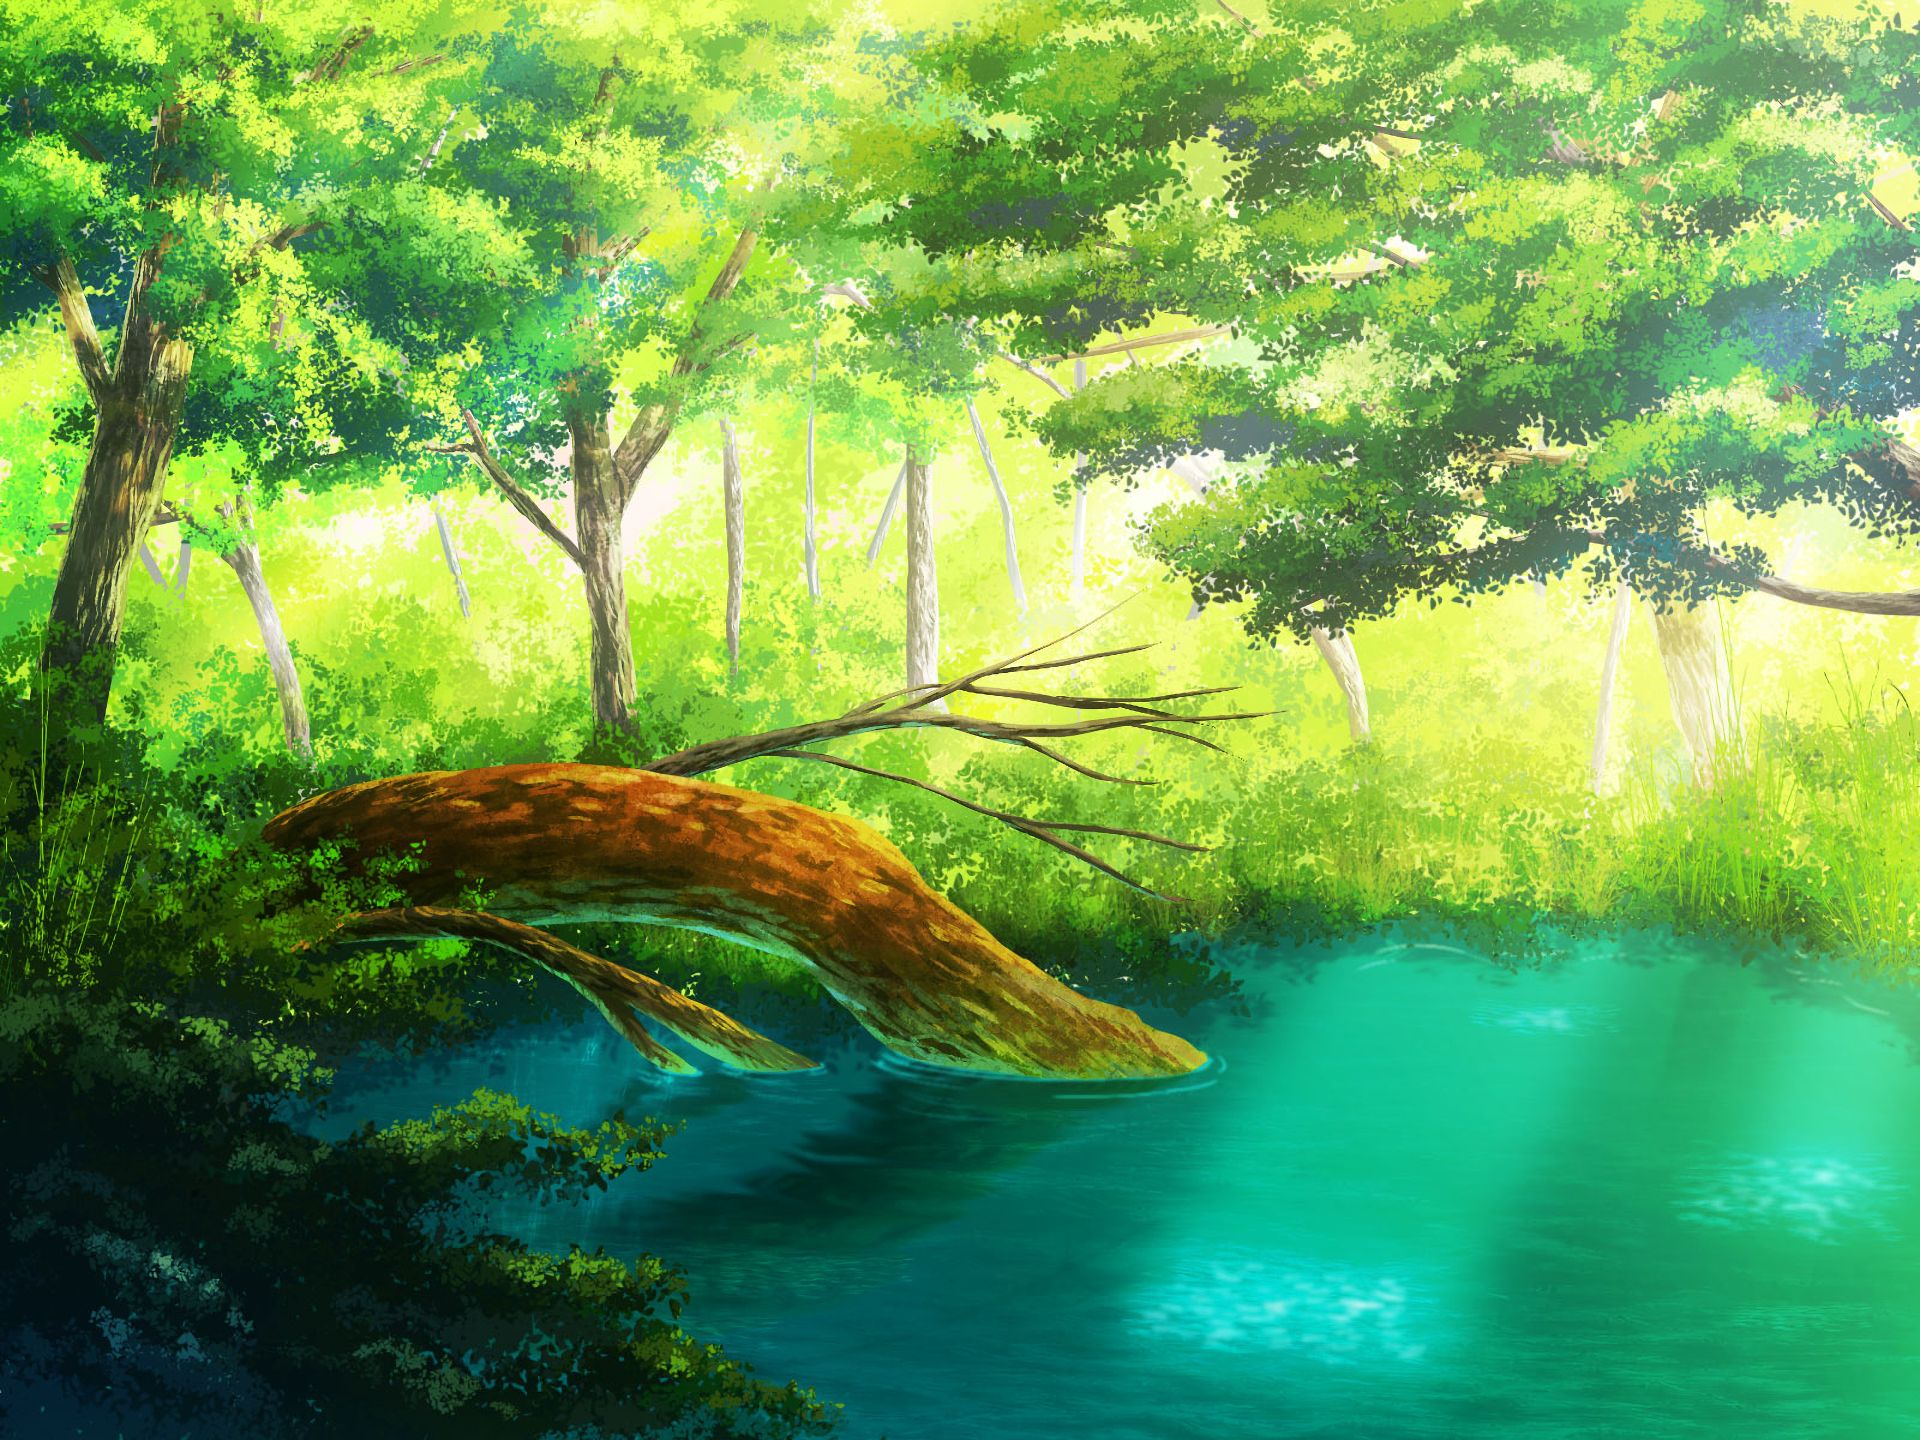 Wallpaper ylpylf, original Anime female forest Trees frock 1600x1200